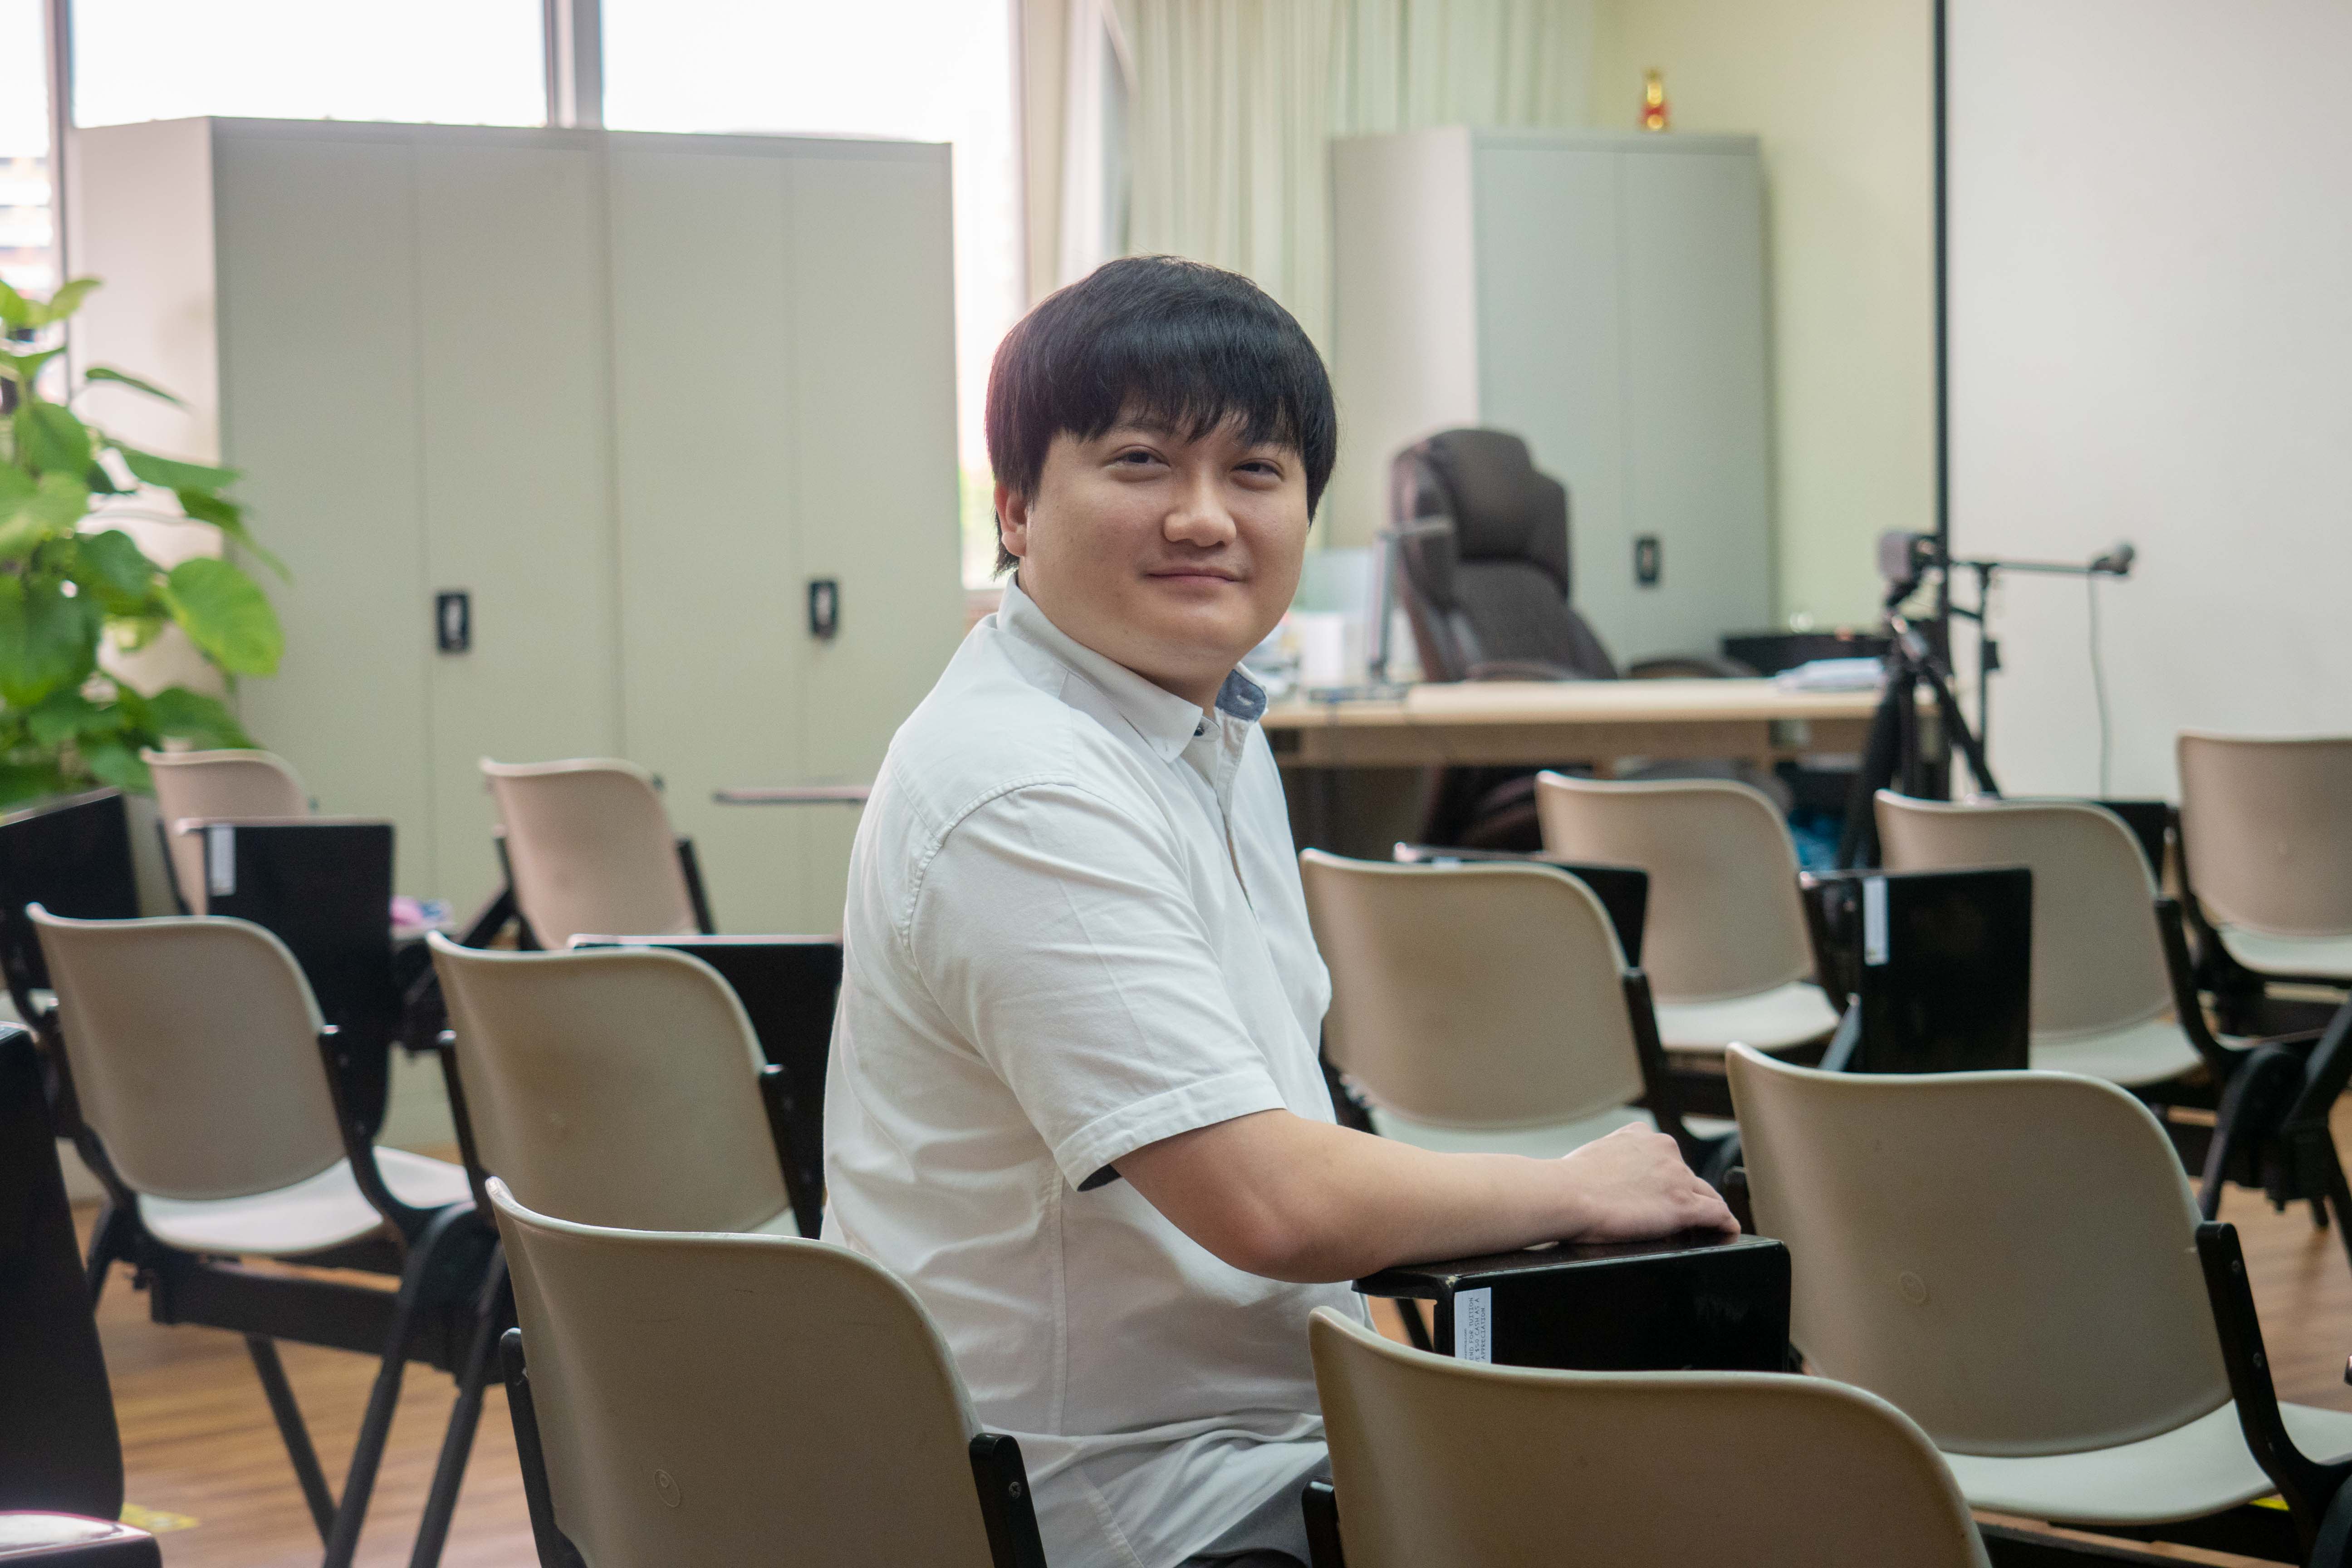 SME Diaries: Adapting to online lessons at my tuition centre was a challenge amid Covid-19, but we left no one behind